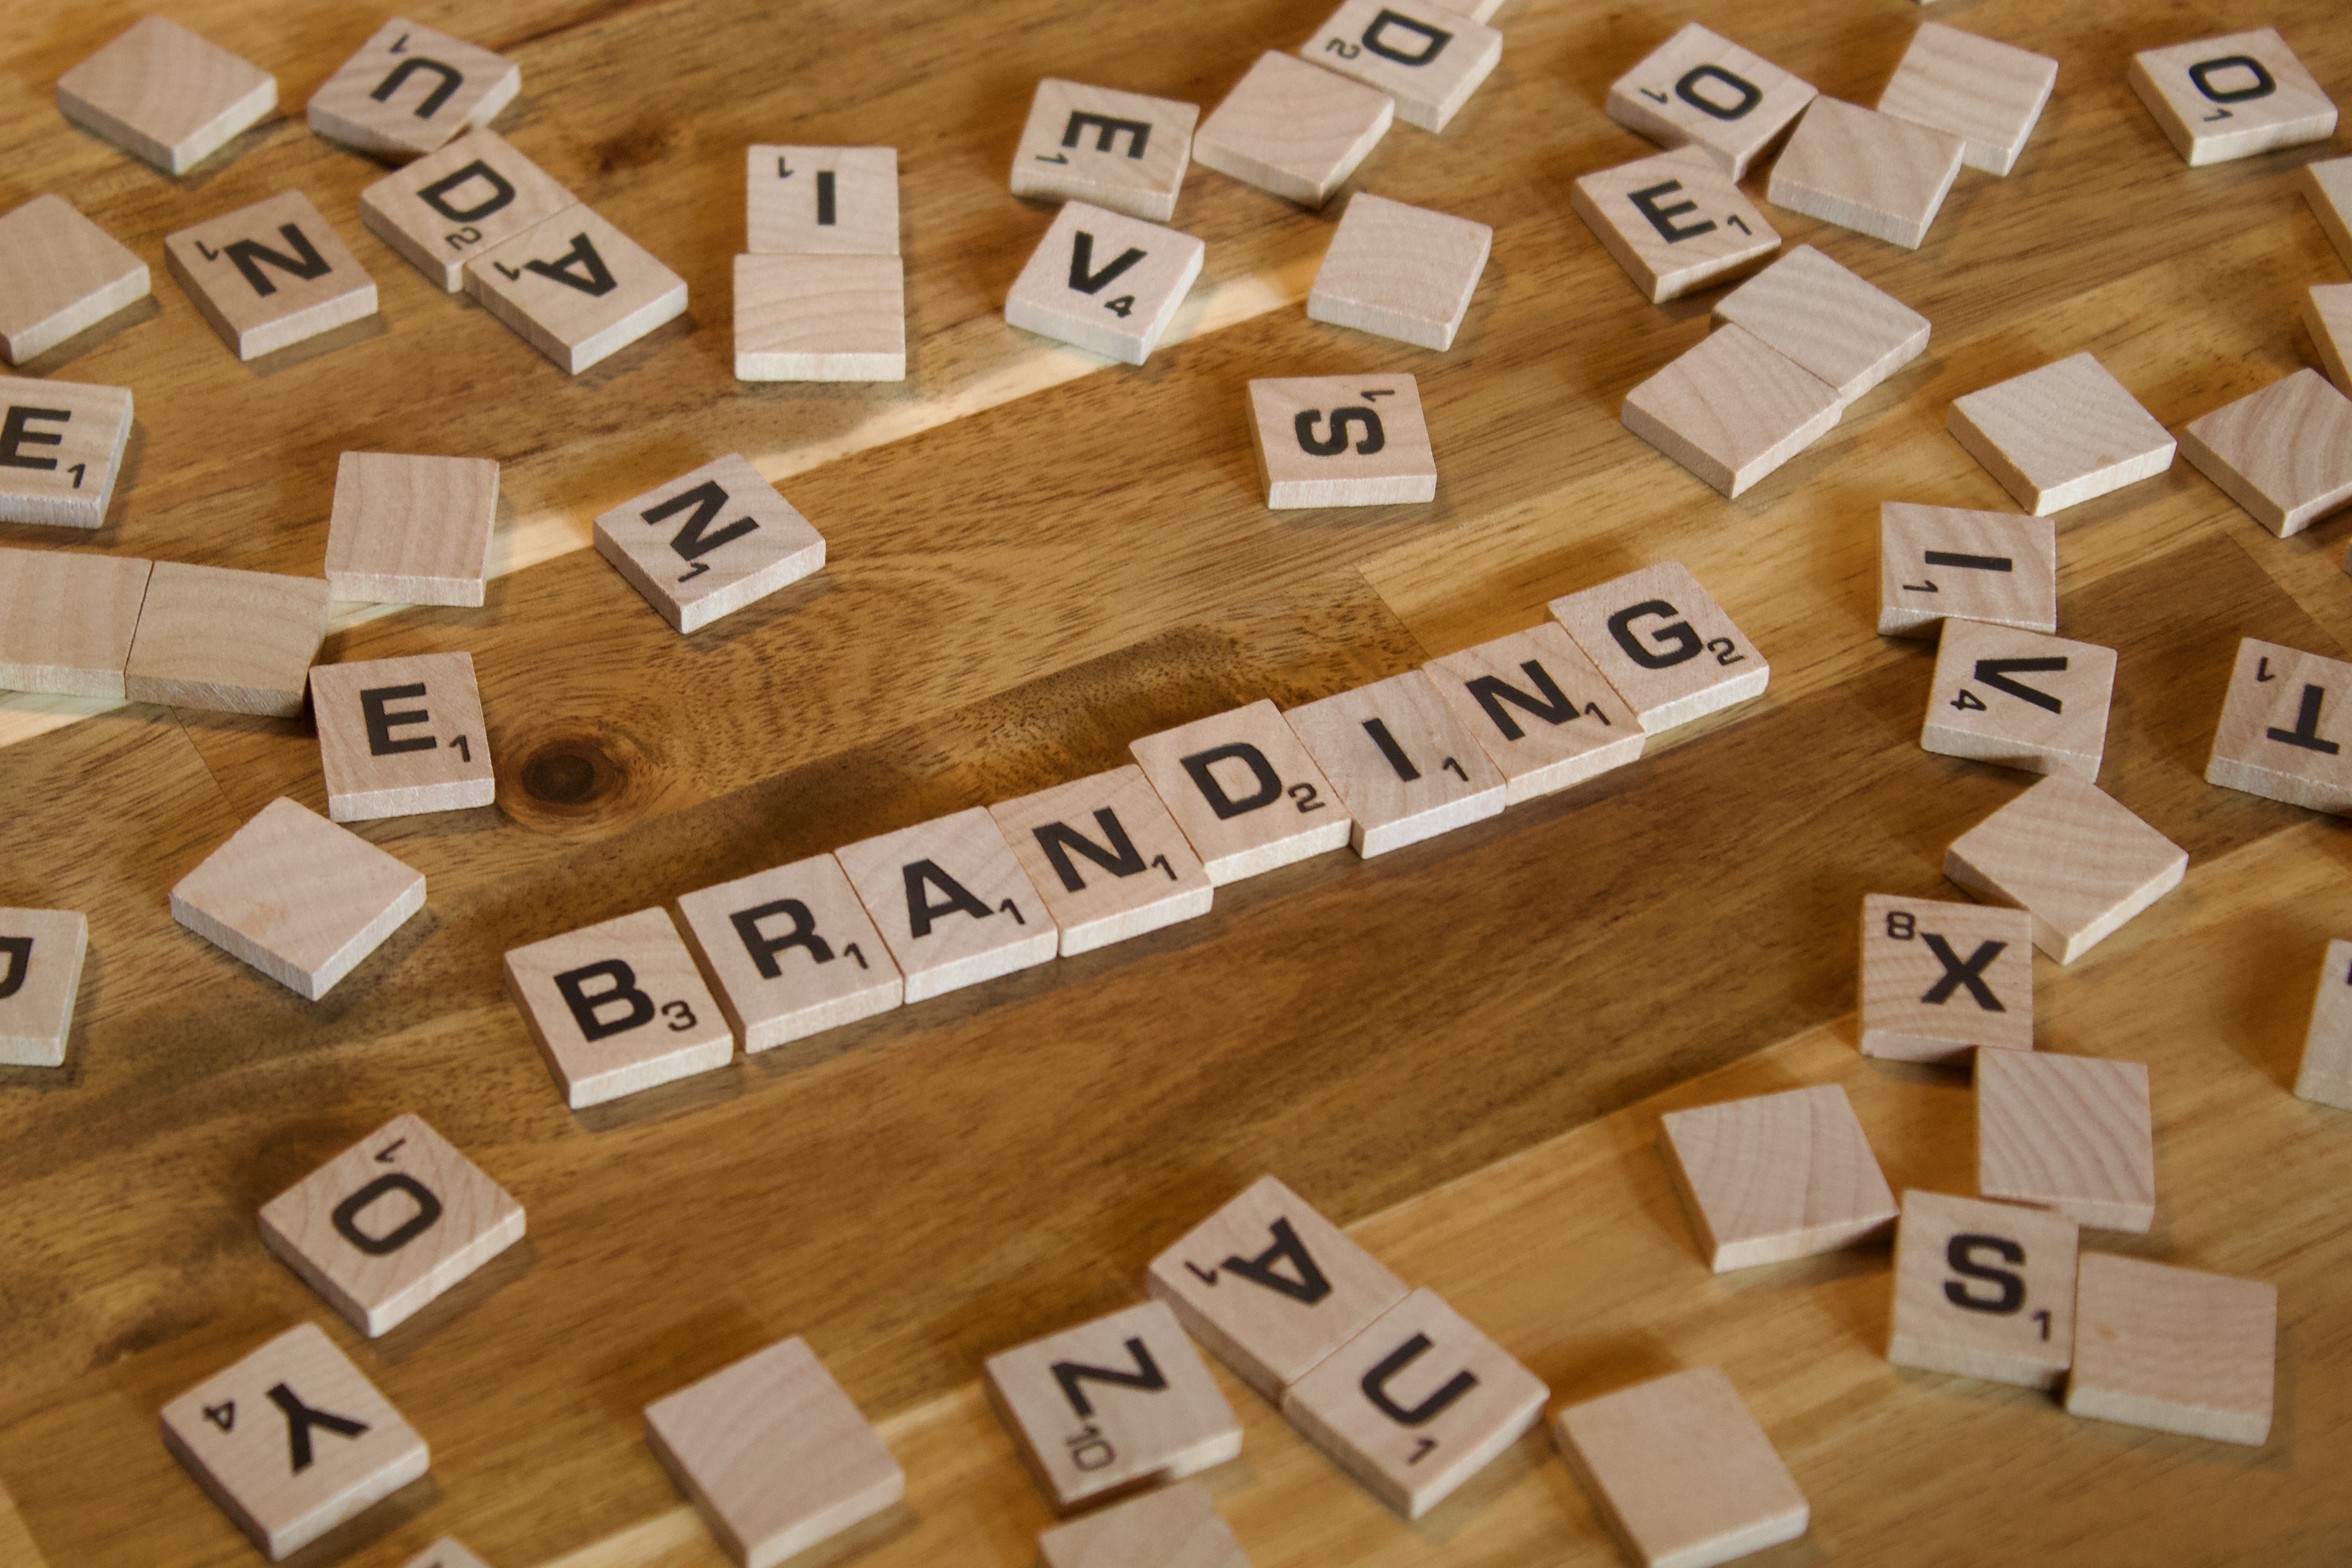 The word "Branding" spelled out in Scrabble letters